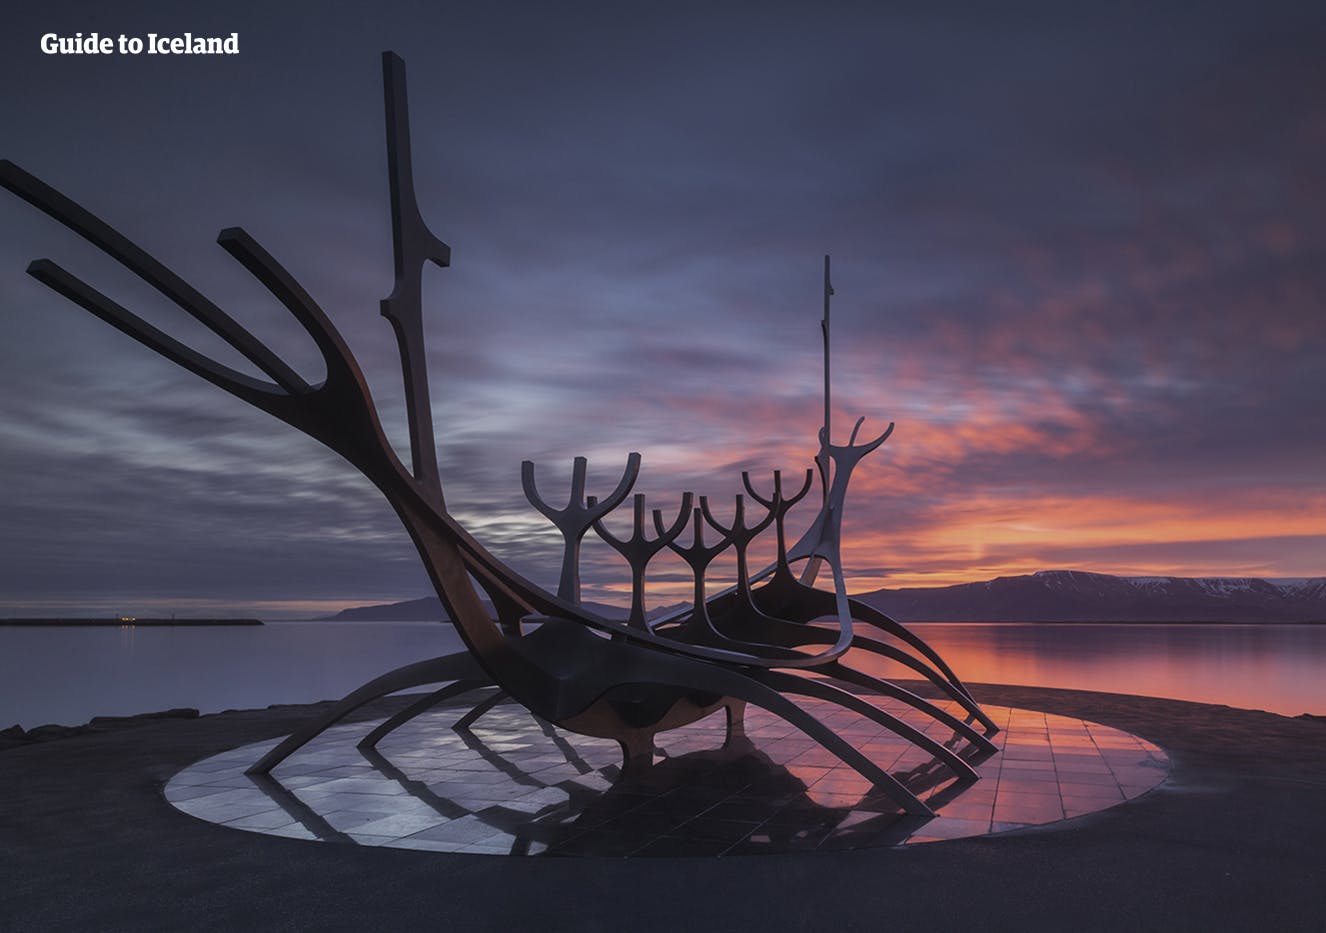 Reykjavik has many pieces of public art, like the Sun Voyager statue.